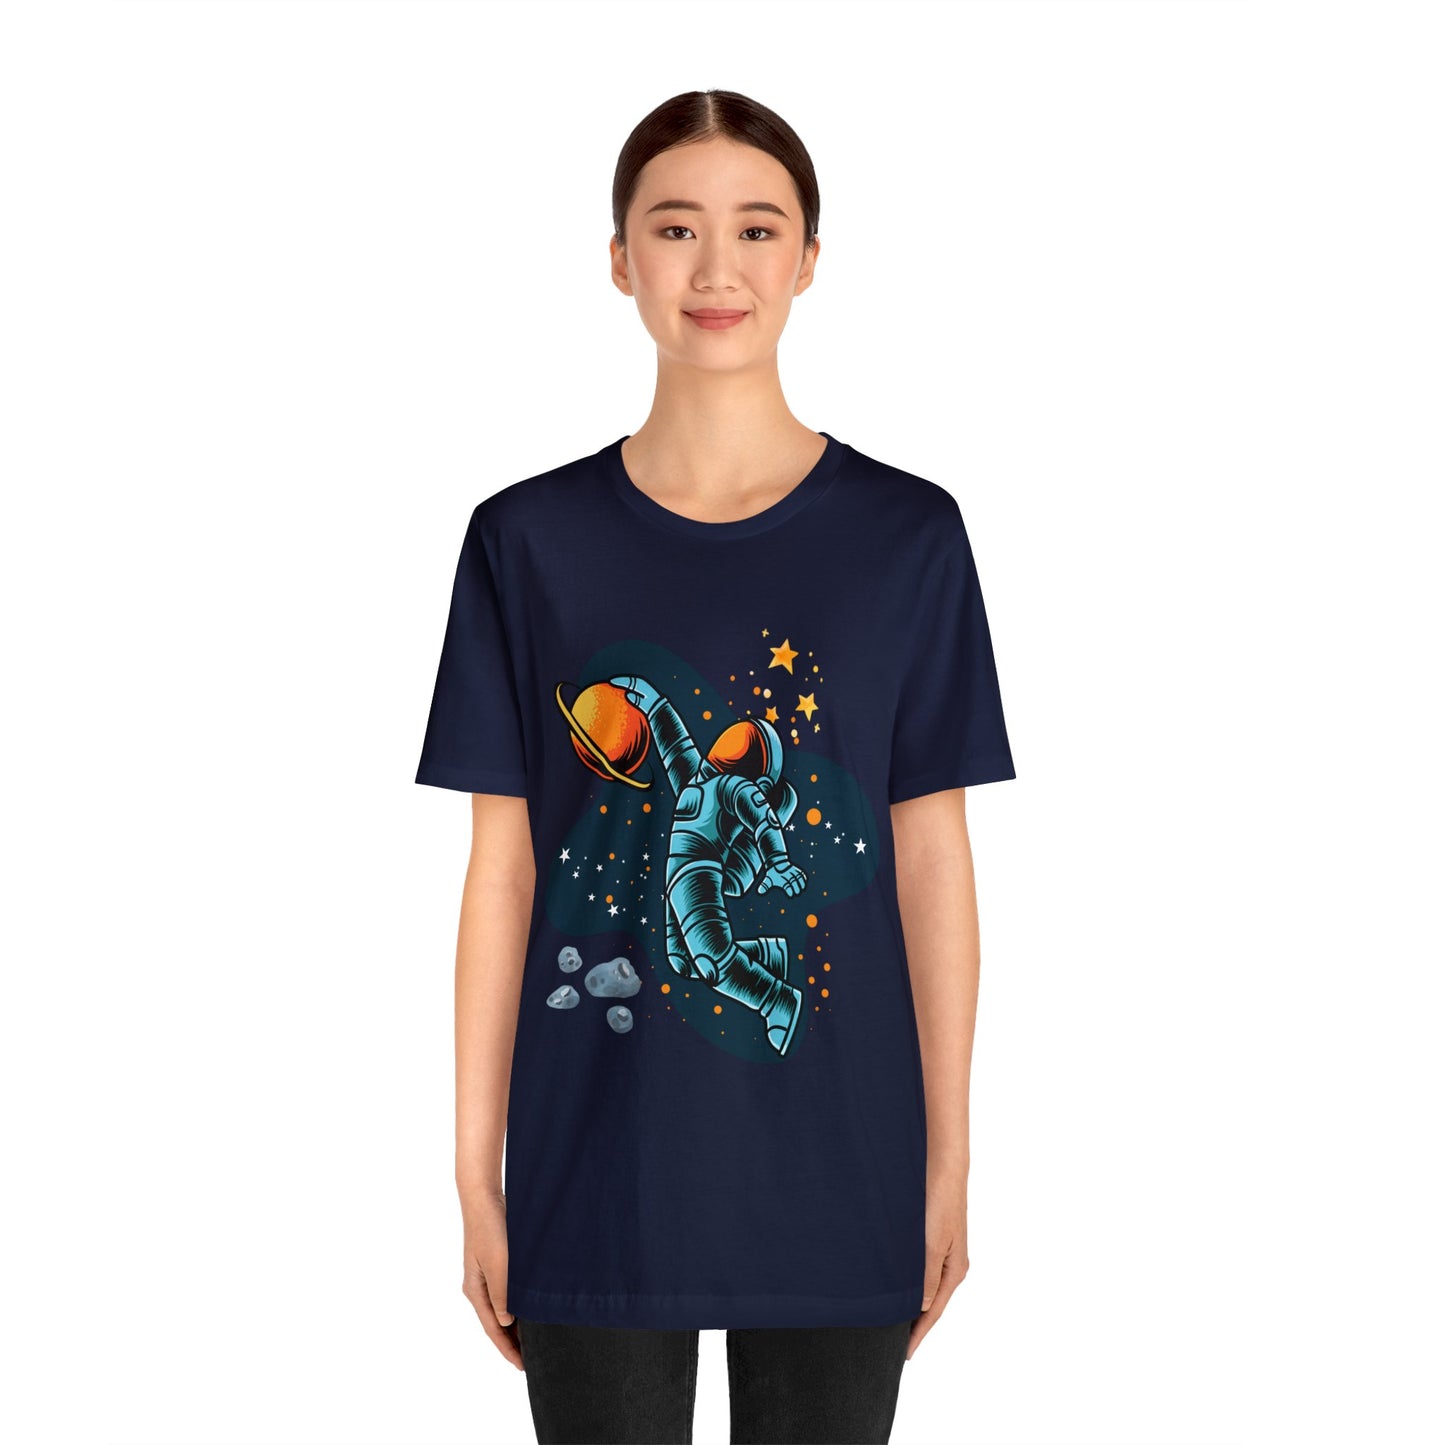 Astronaut Dunking On Saturn - Graphic T Shirt For Men and Women